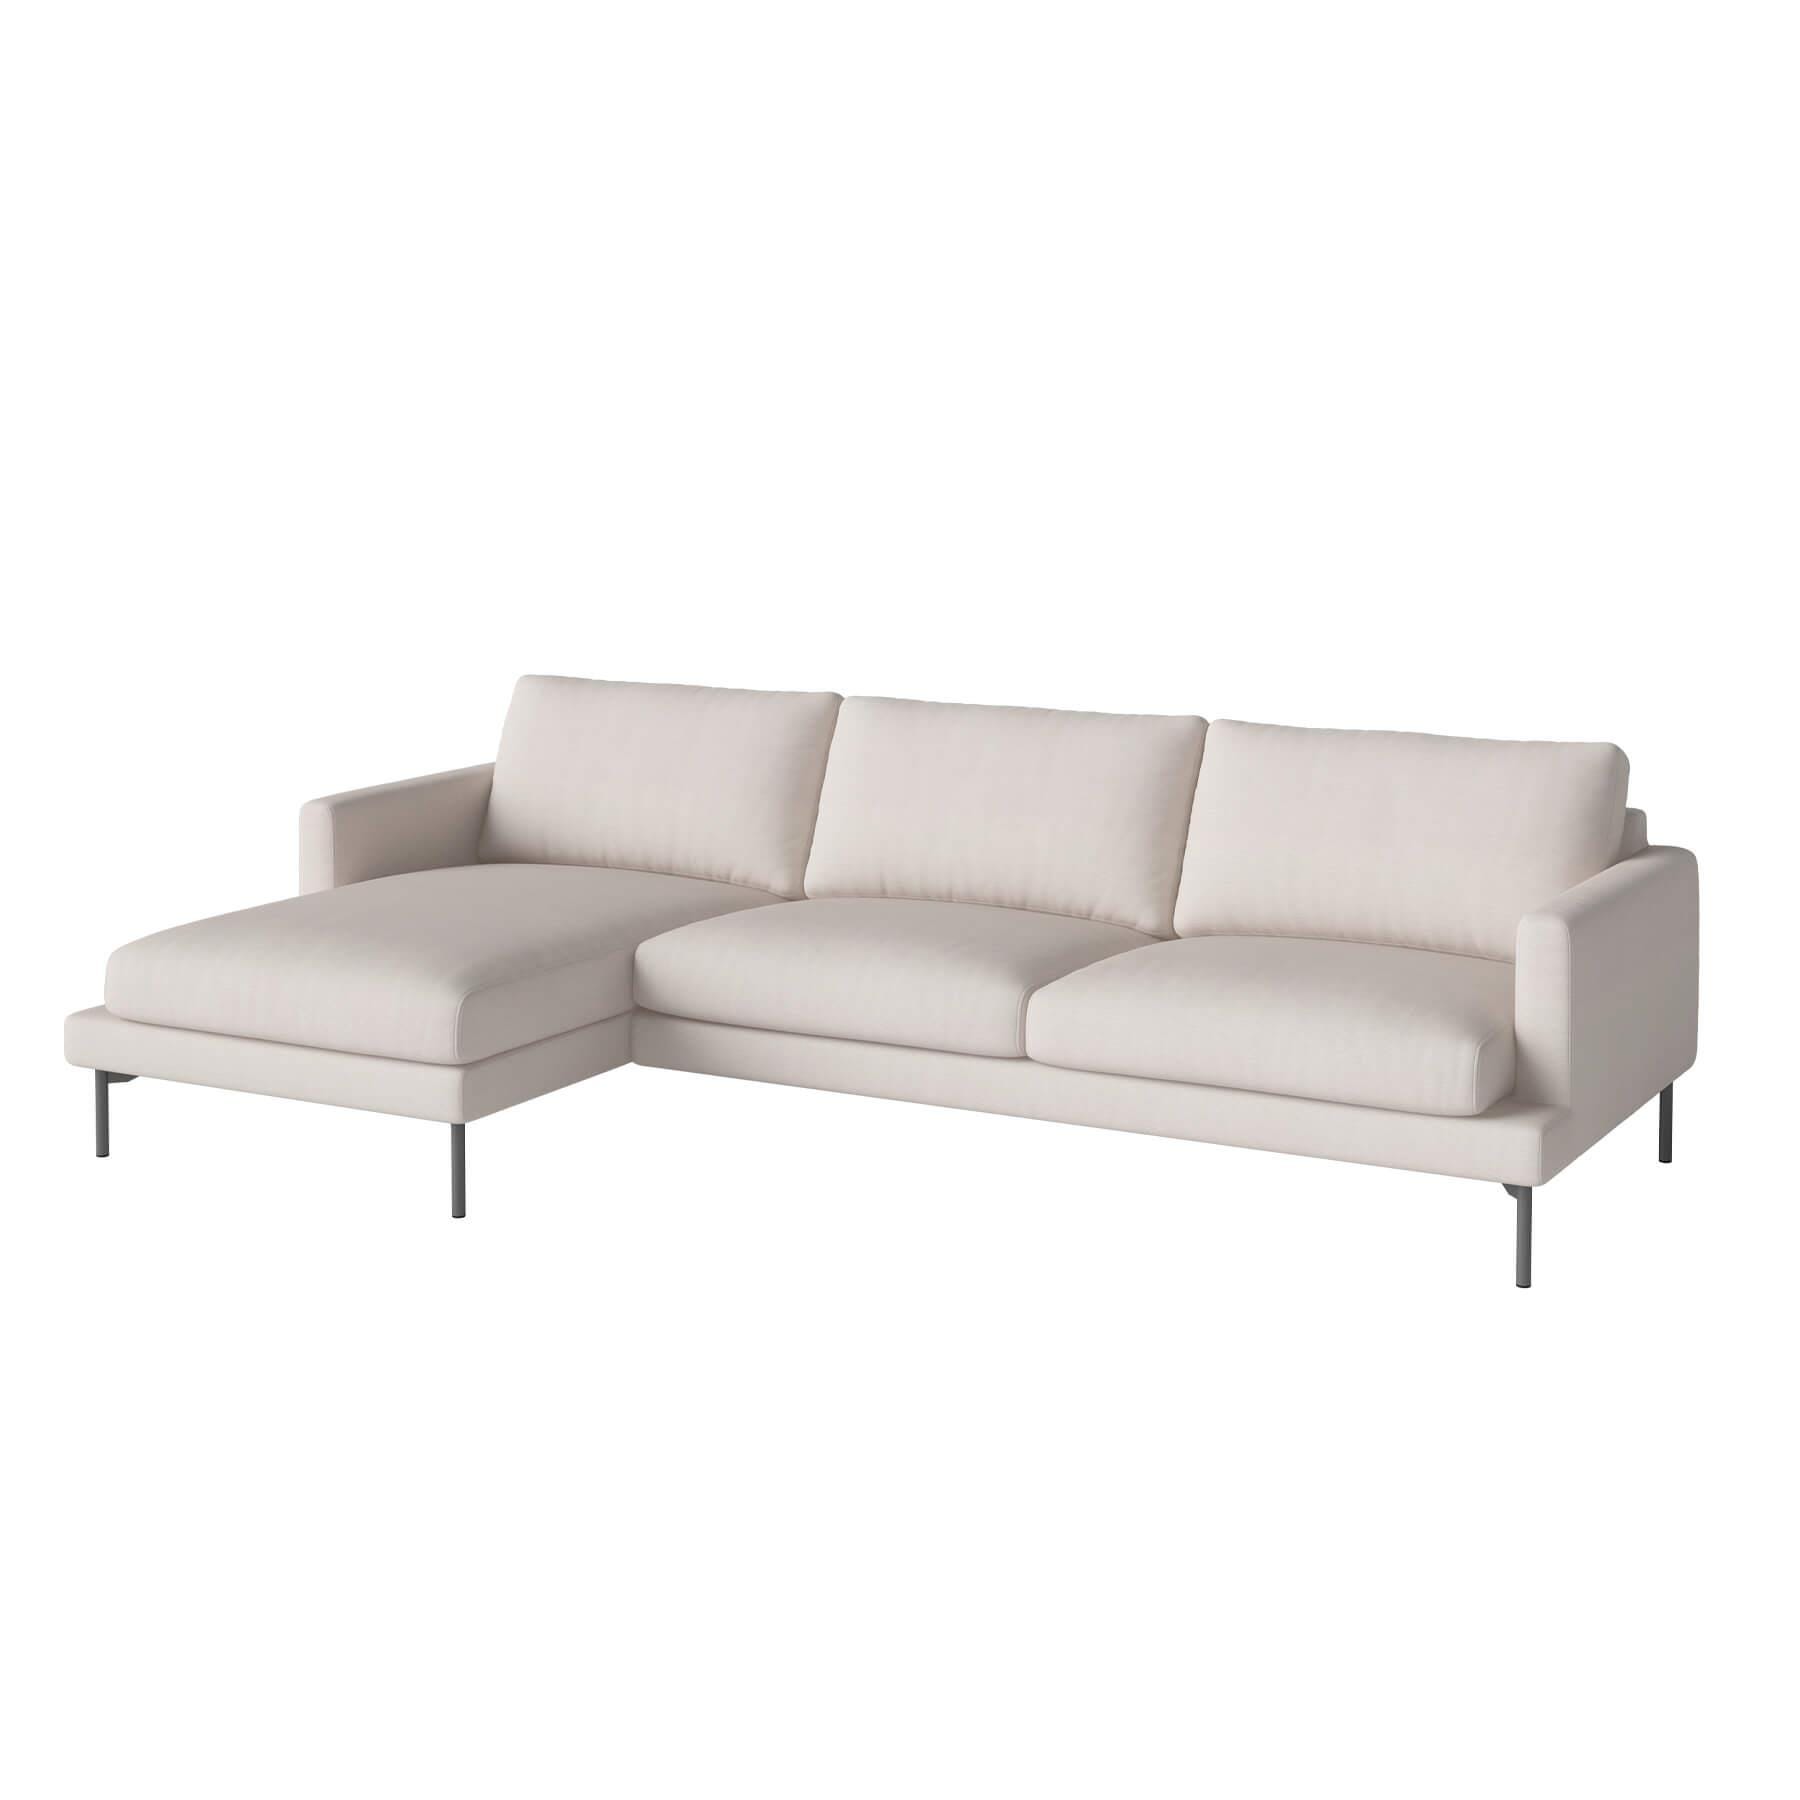 Bolia Veneda Sofa 35 Seater Sofa With Chaise Longue Grey Laquered Steel Linea Beige Left Brown Designer Furniture From Holloways Of Ludlow